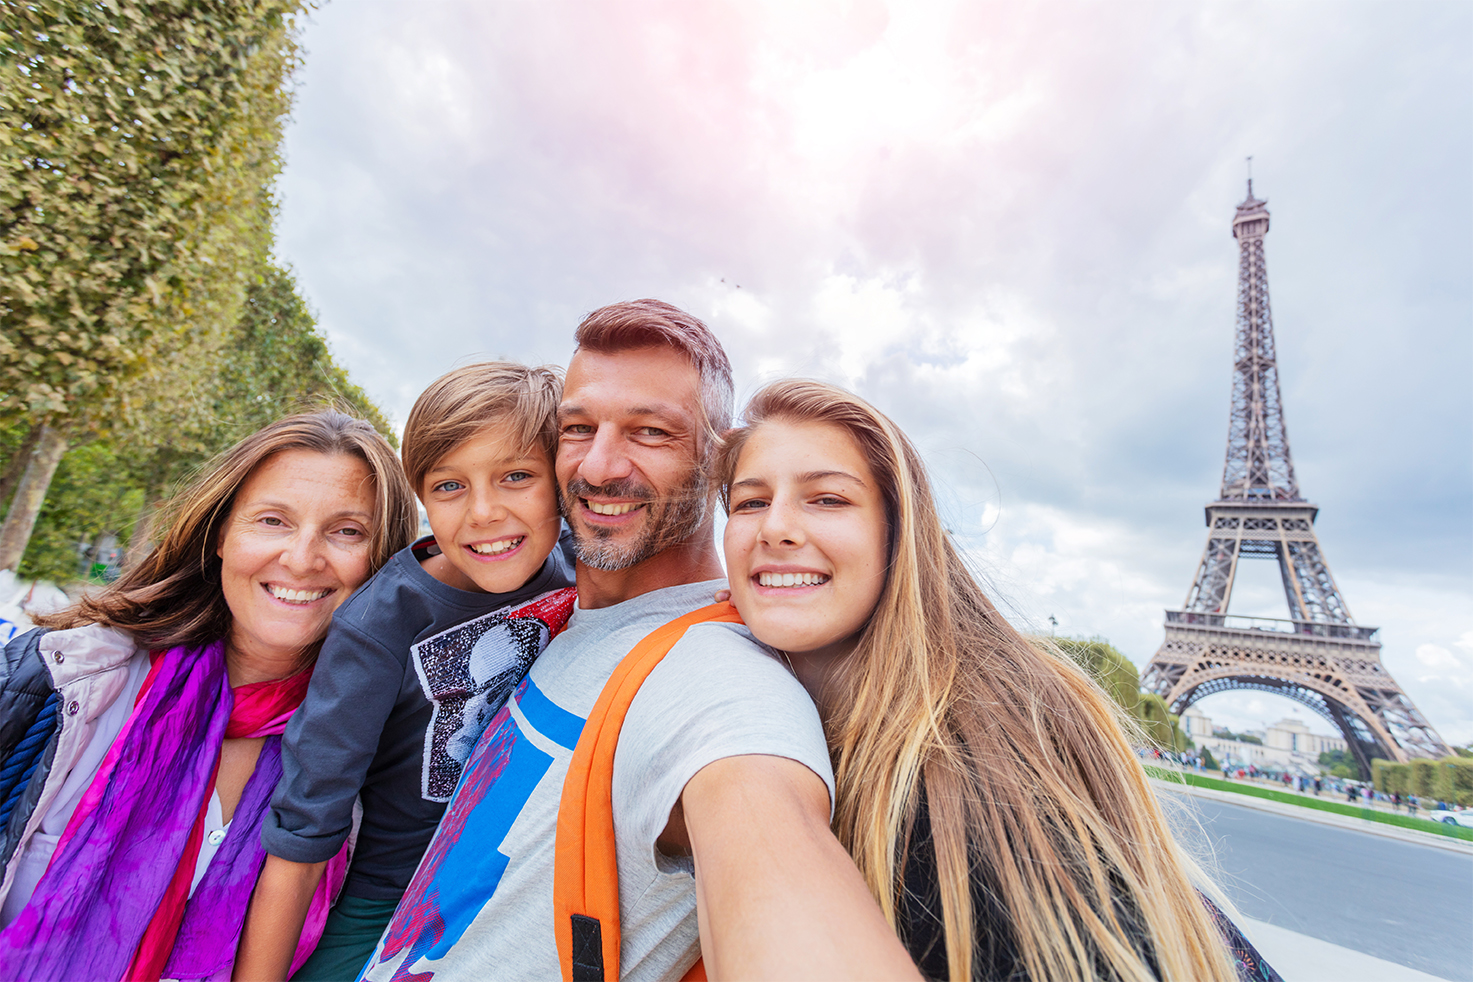 A family of four captures priceless Parisian memories that they paid for through their vacation savings account.